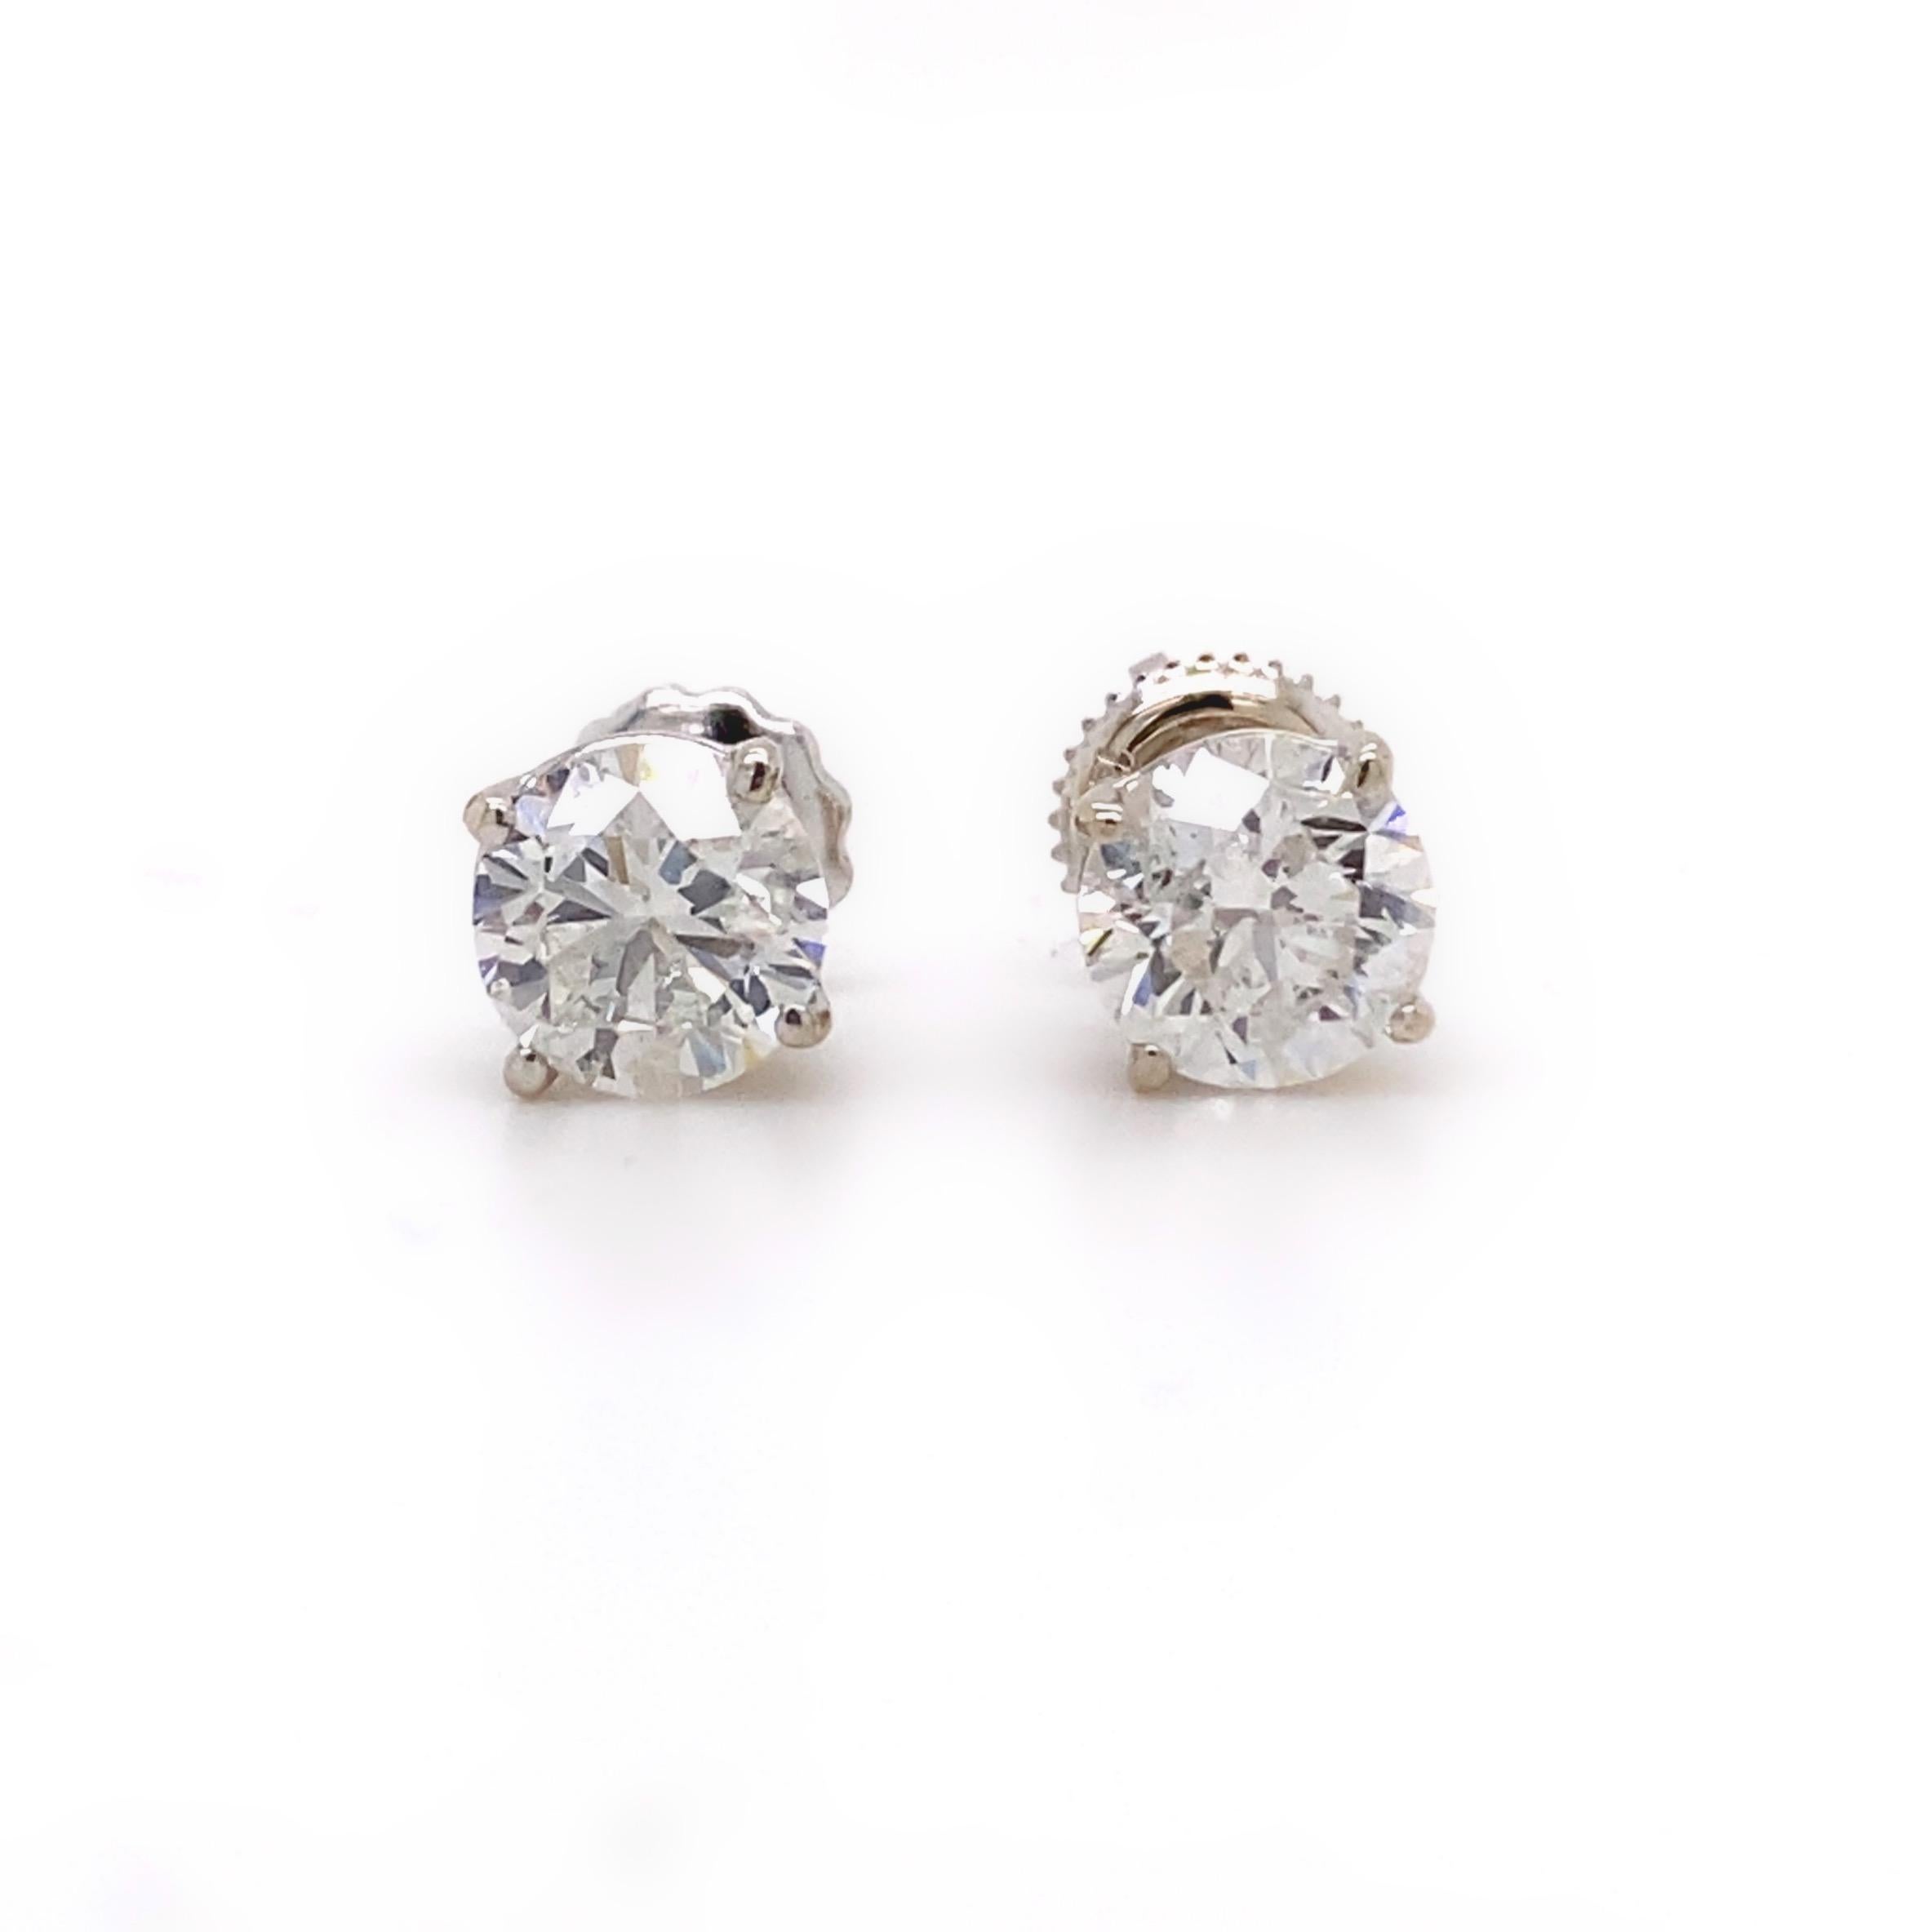 Round Solitaire Diamond Stud Earrings 1.82 Tcw Set in 14kt White Gold For Sale 6